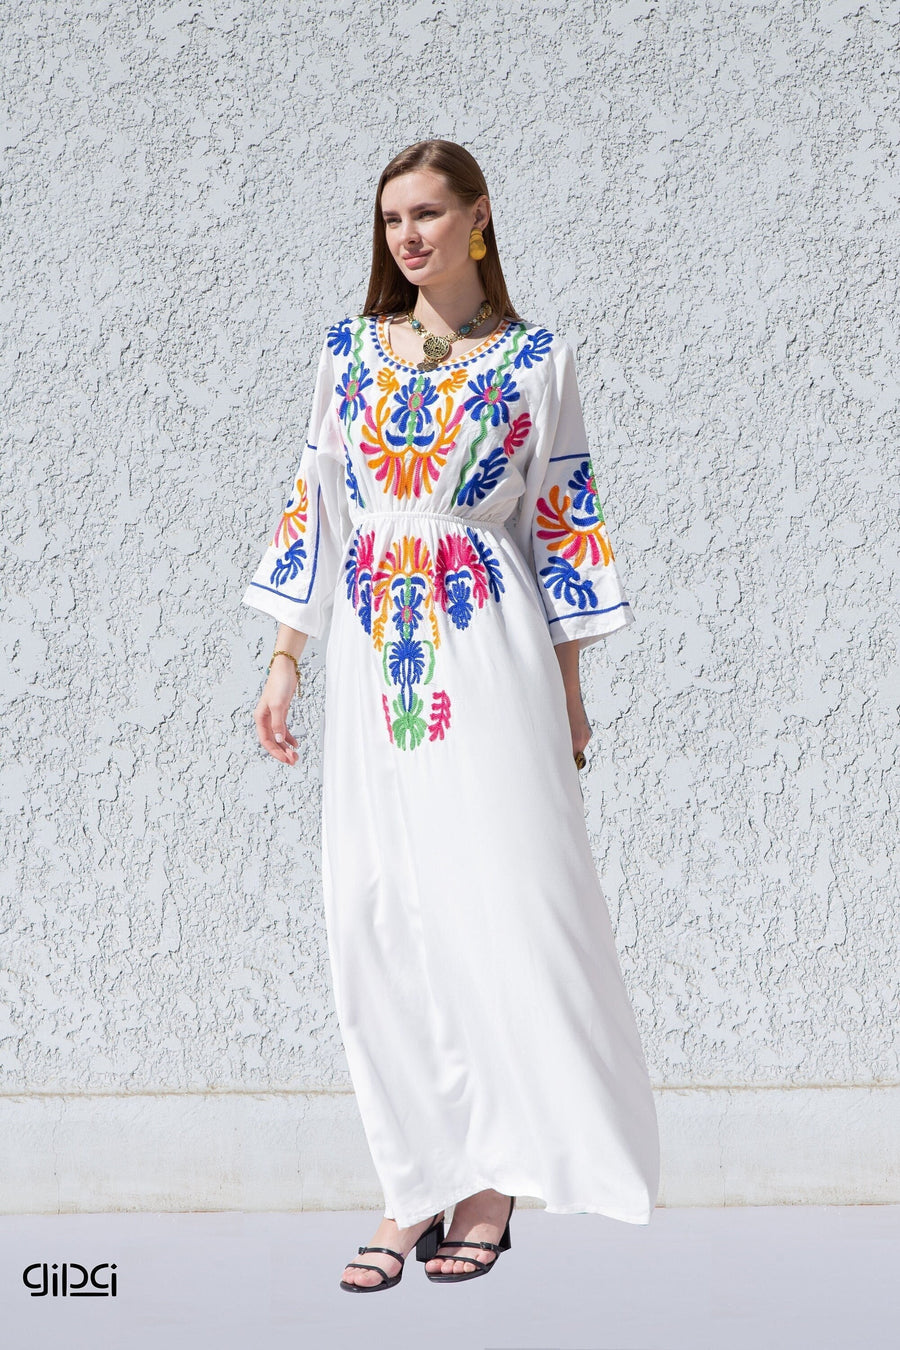 White colorful embroidered cotton Caftan, caftan Kaftan maxi dress, embroidered Caftan dress, Caftan maxi dress, Caftans for women, Caftans